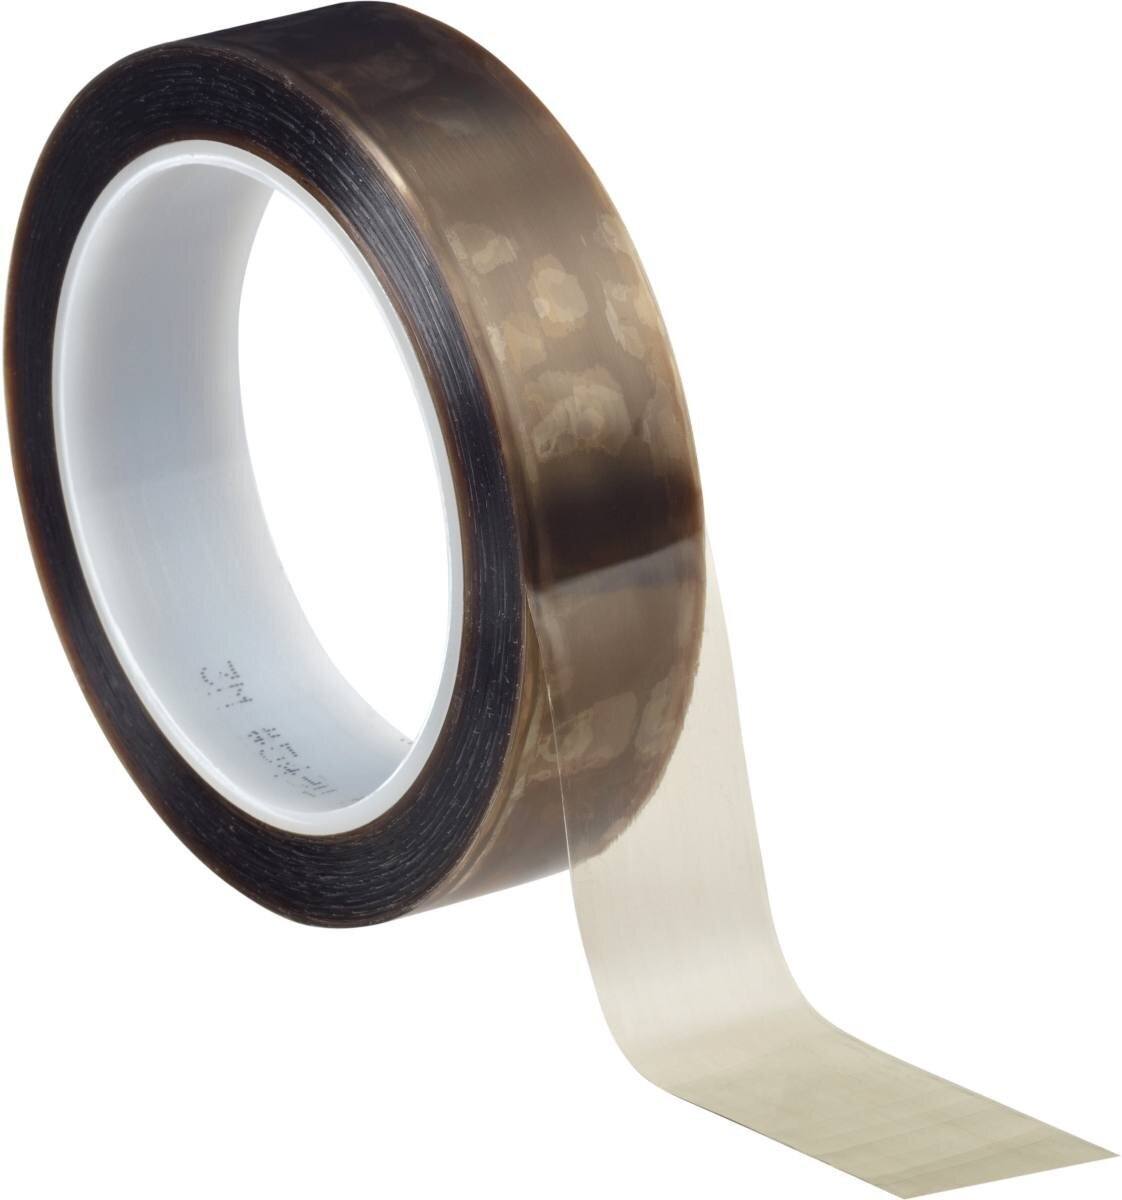 3M 5490 PTFE extruded film adhesive tape 50.8mmx33m, 0.09mm, silicone